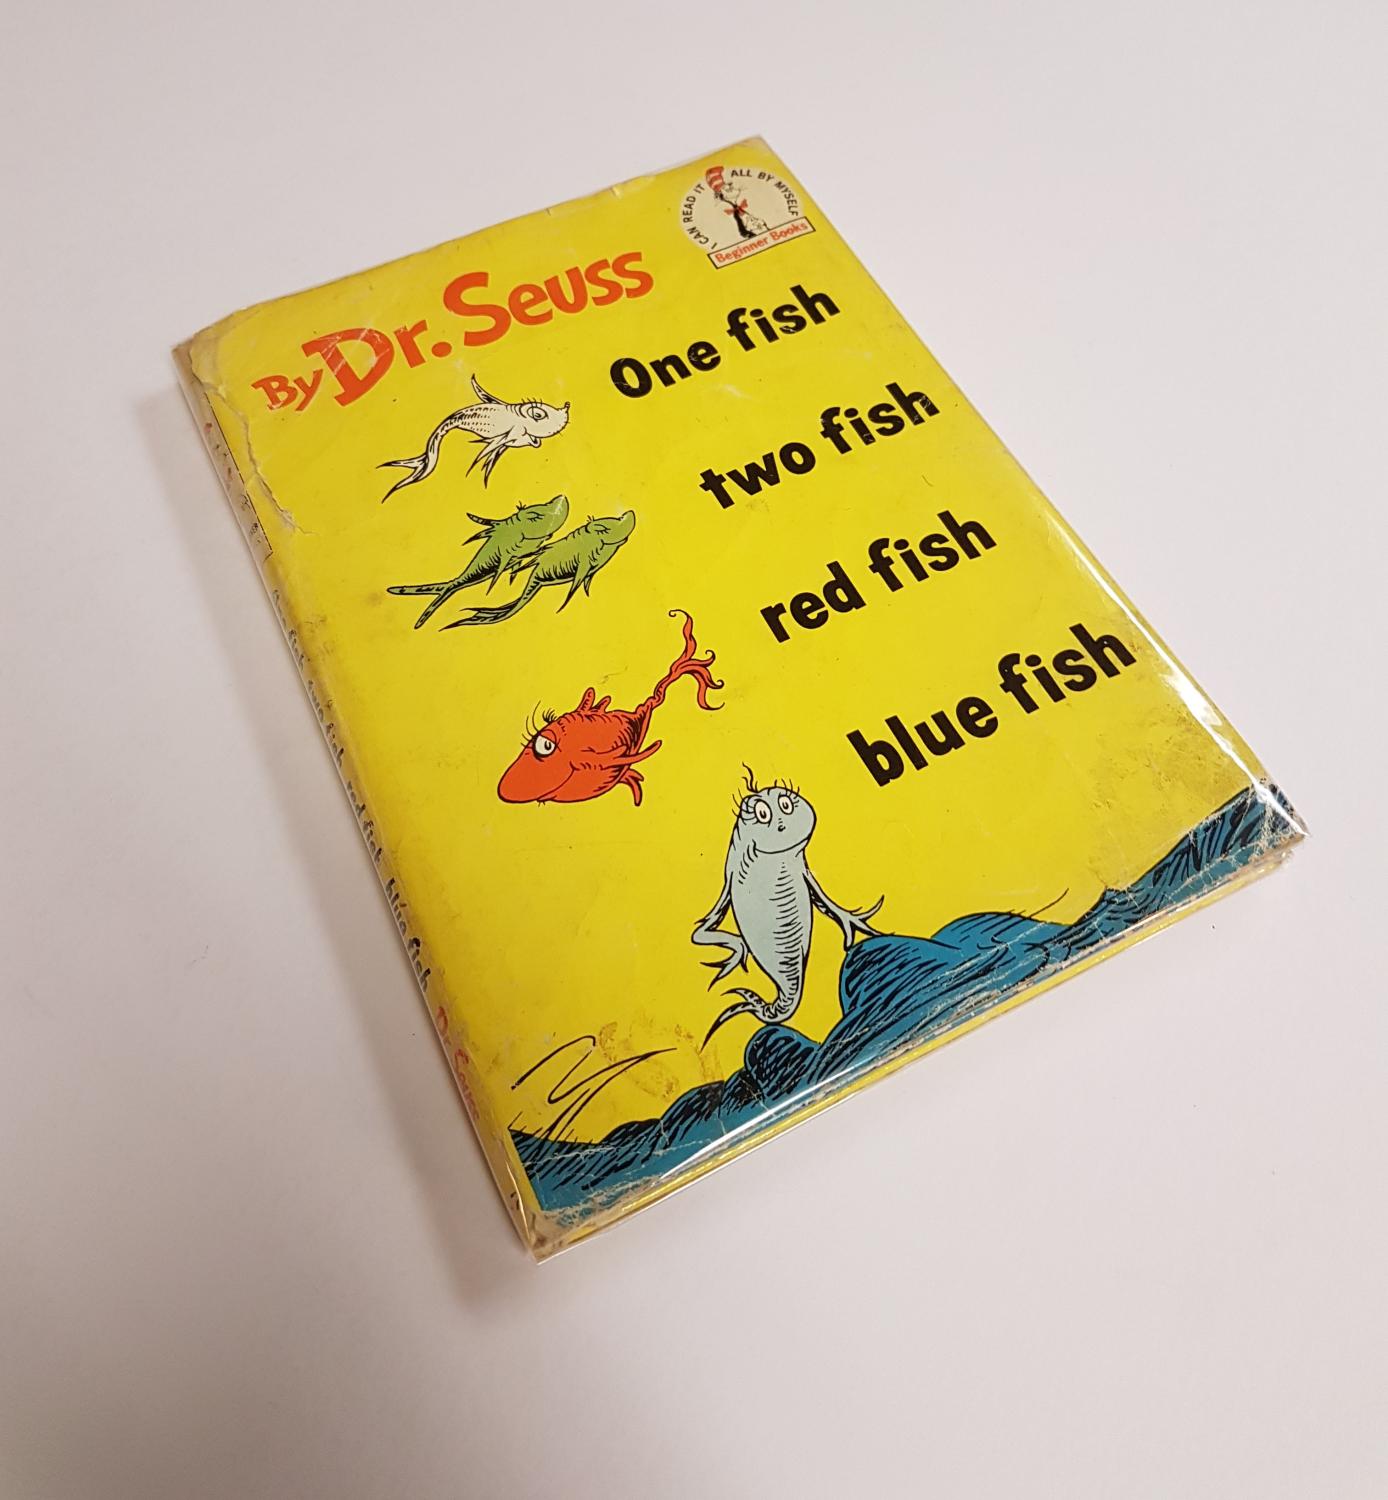 One Fish, Two Fish, Red Fish, Blue Fish - Beginner Books by Seuss